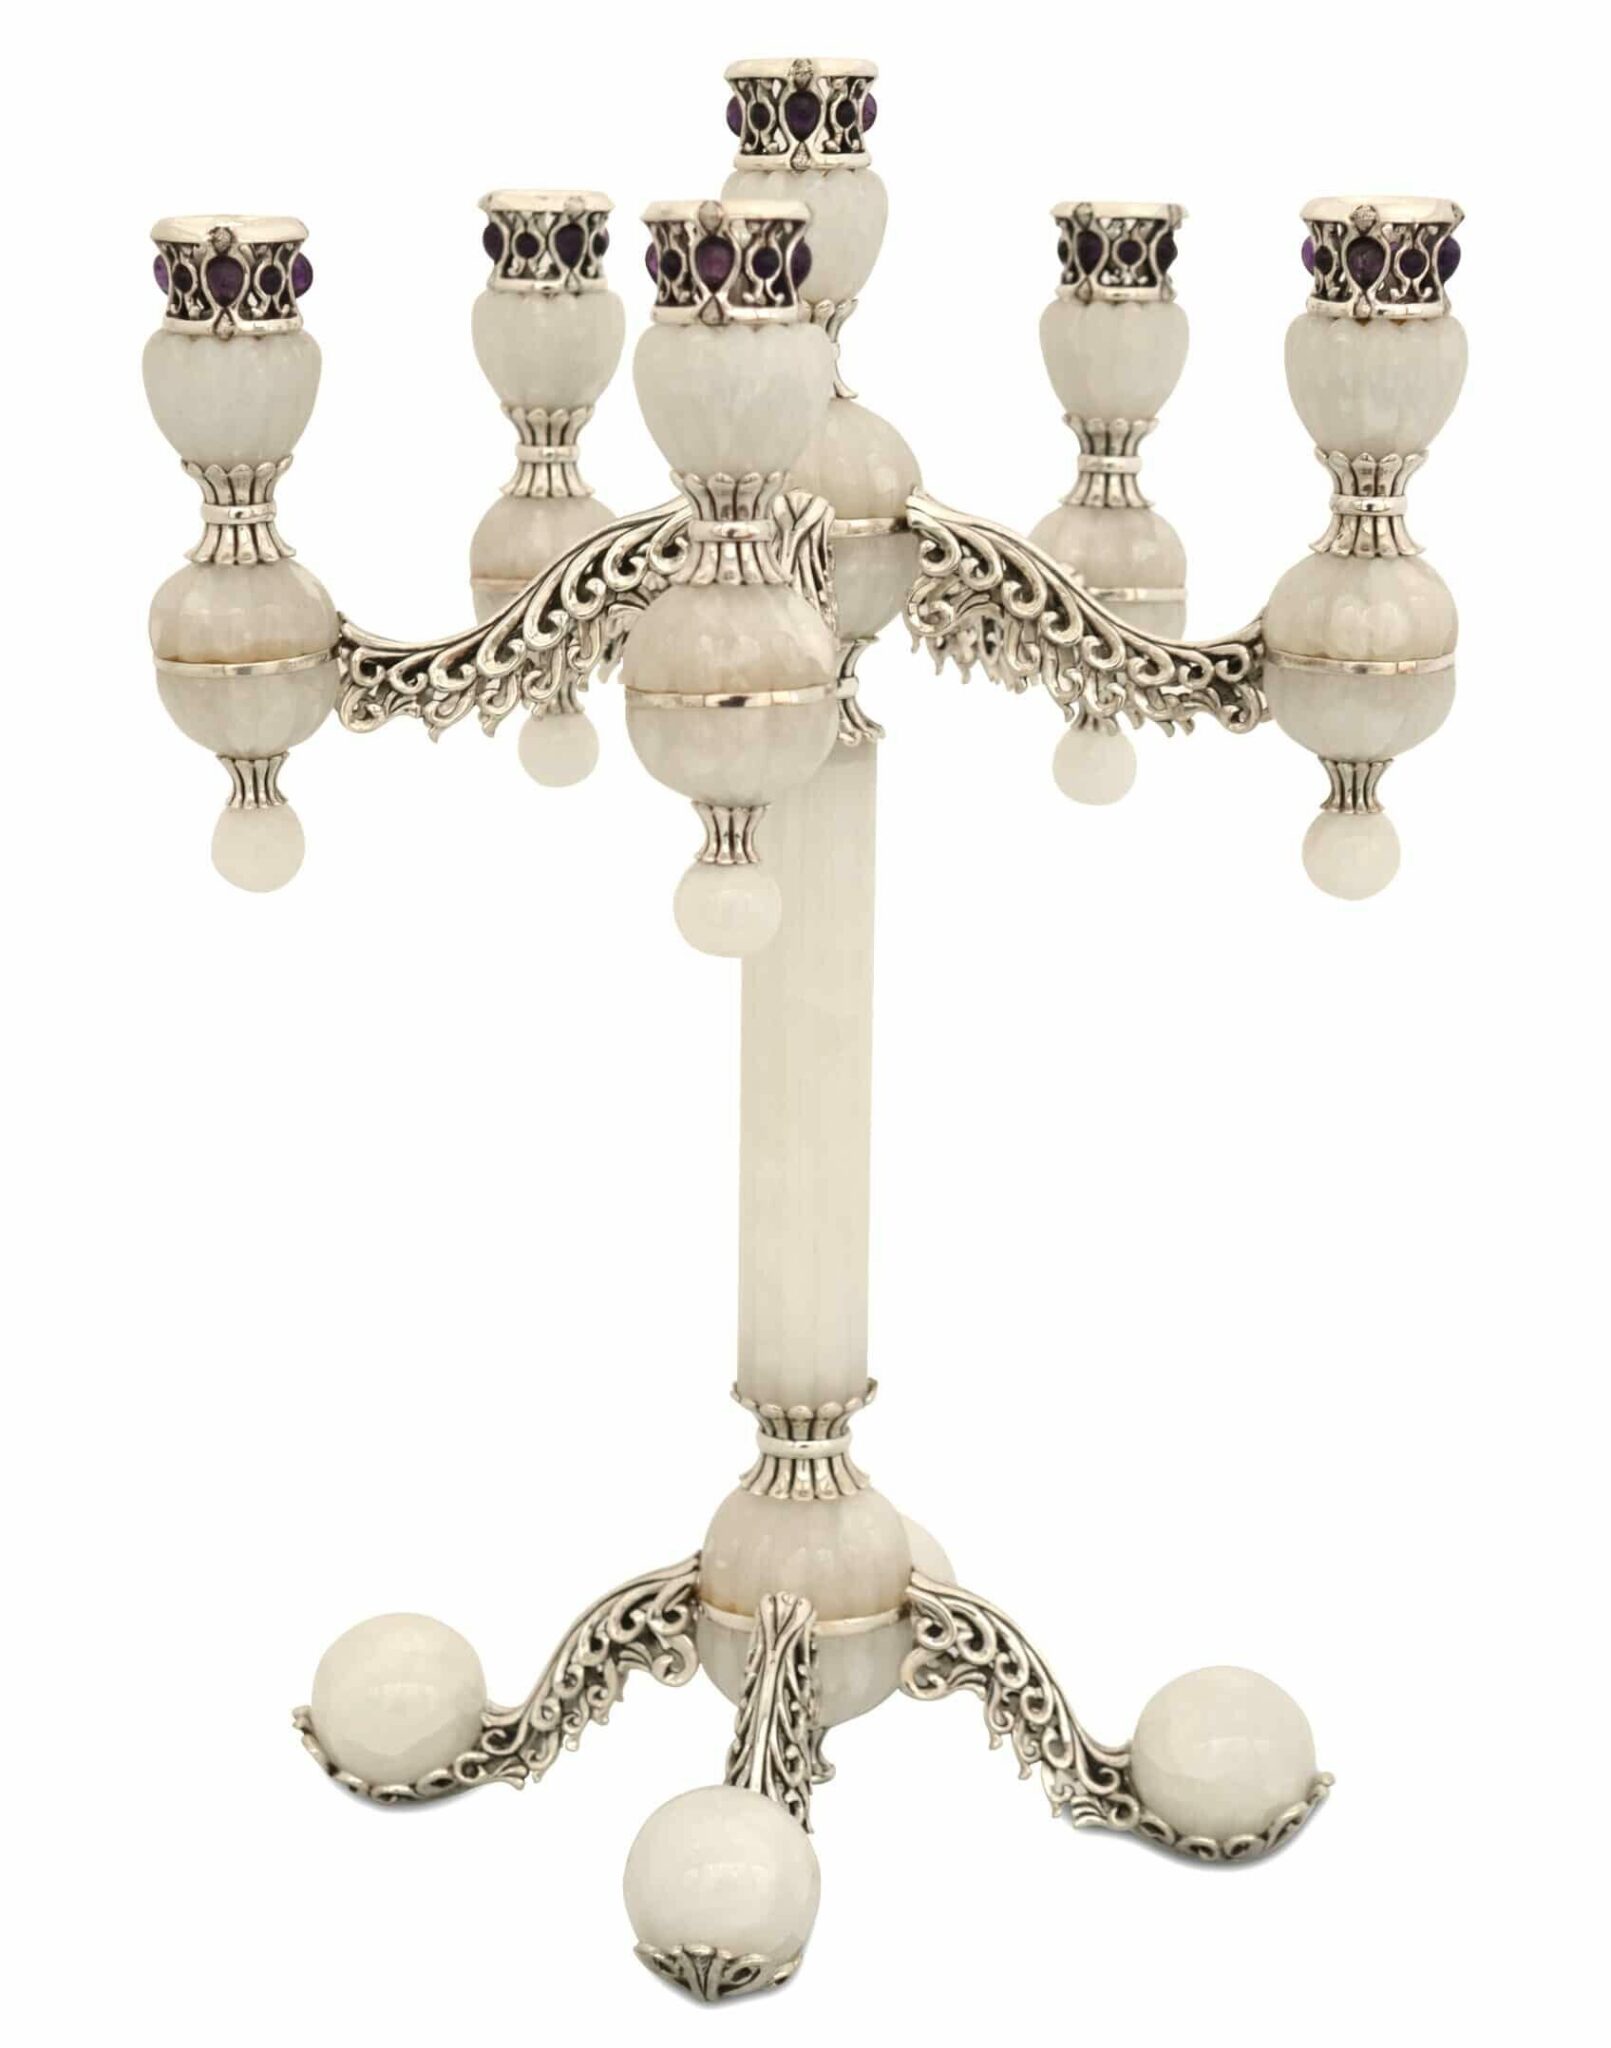 Five Arms White Onyx Candelabra with Amethyst Stones